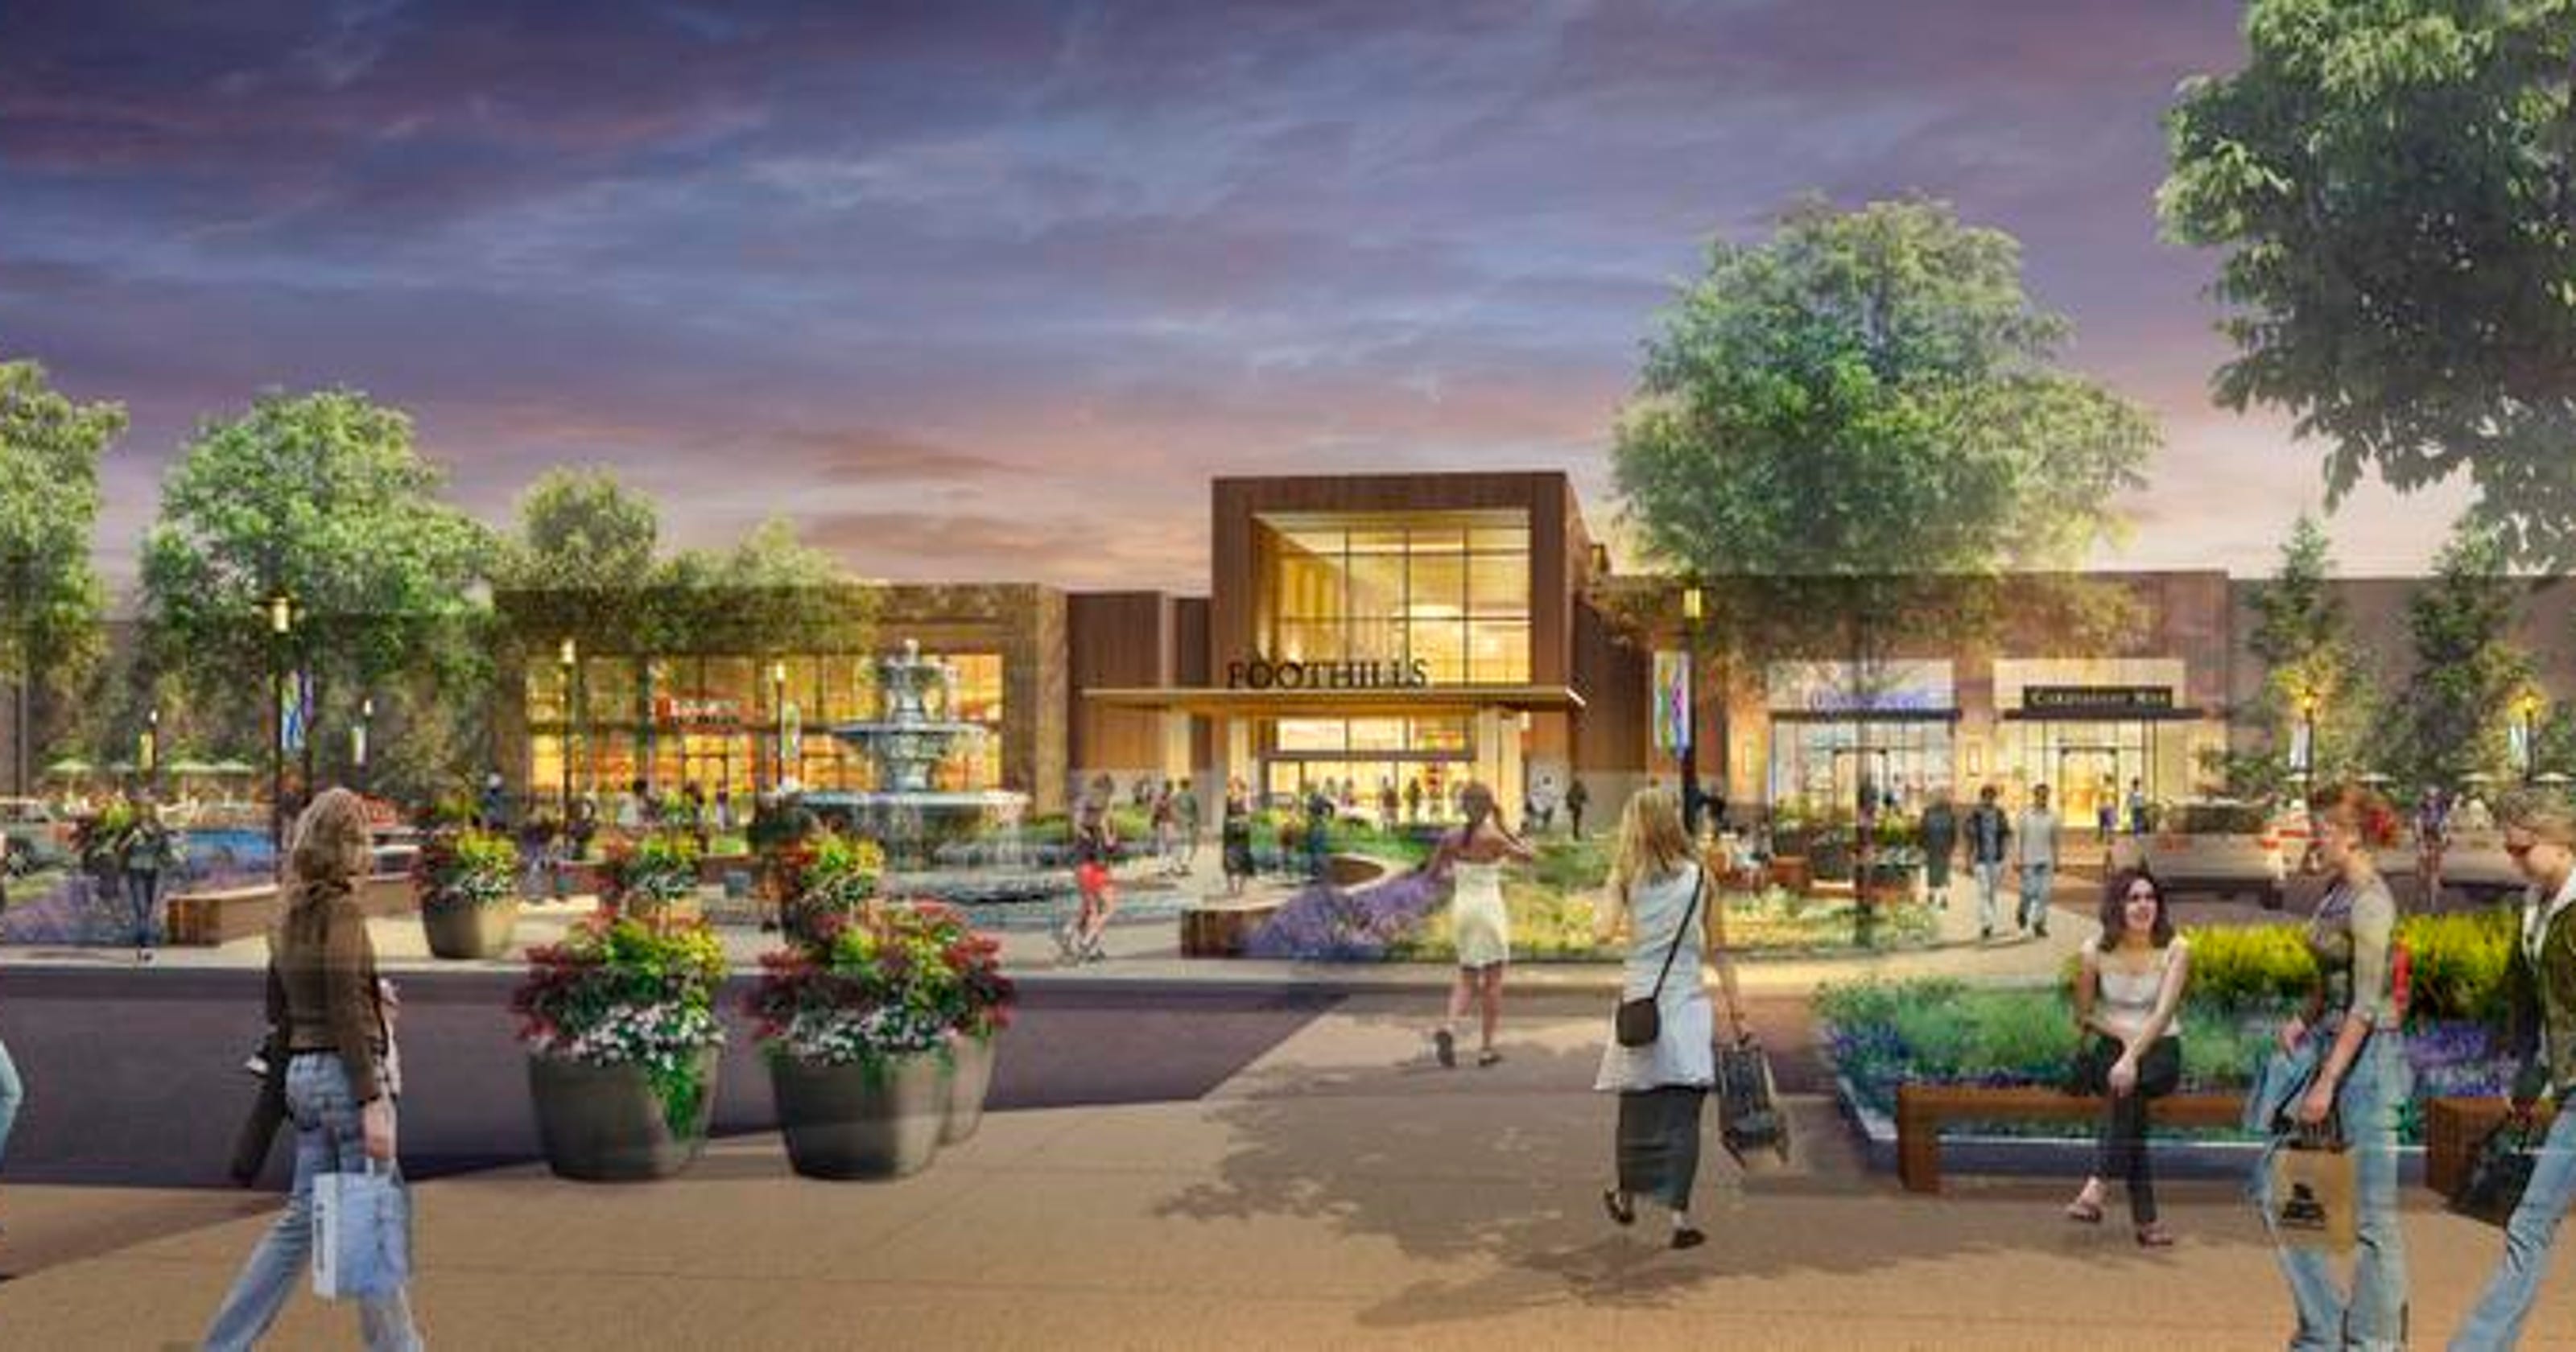 Fort Collins council approves Foothills Mall redevelopment deal